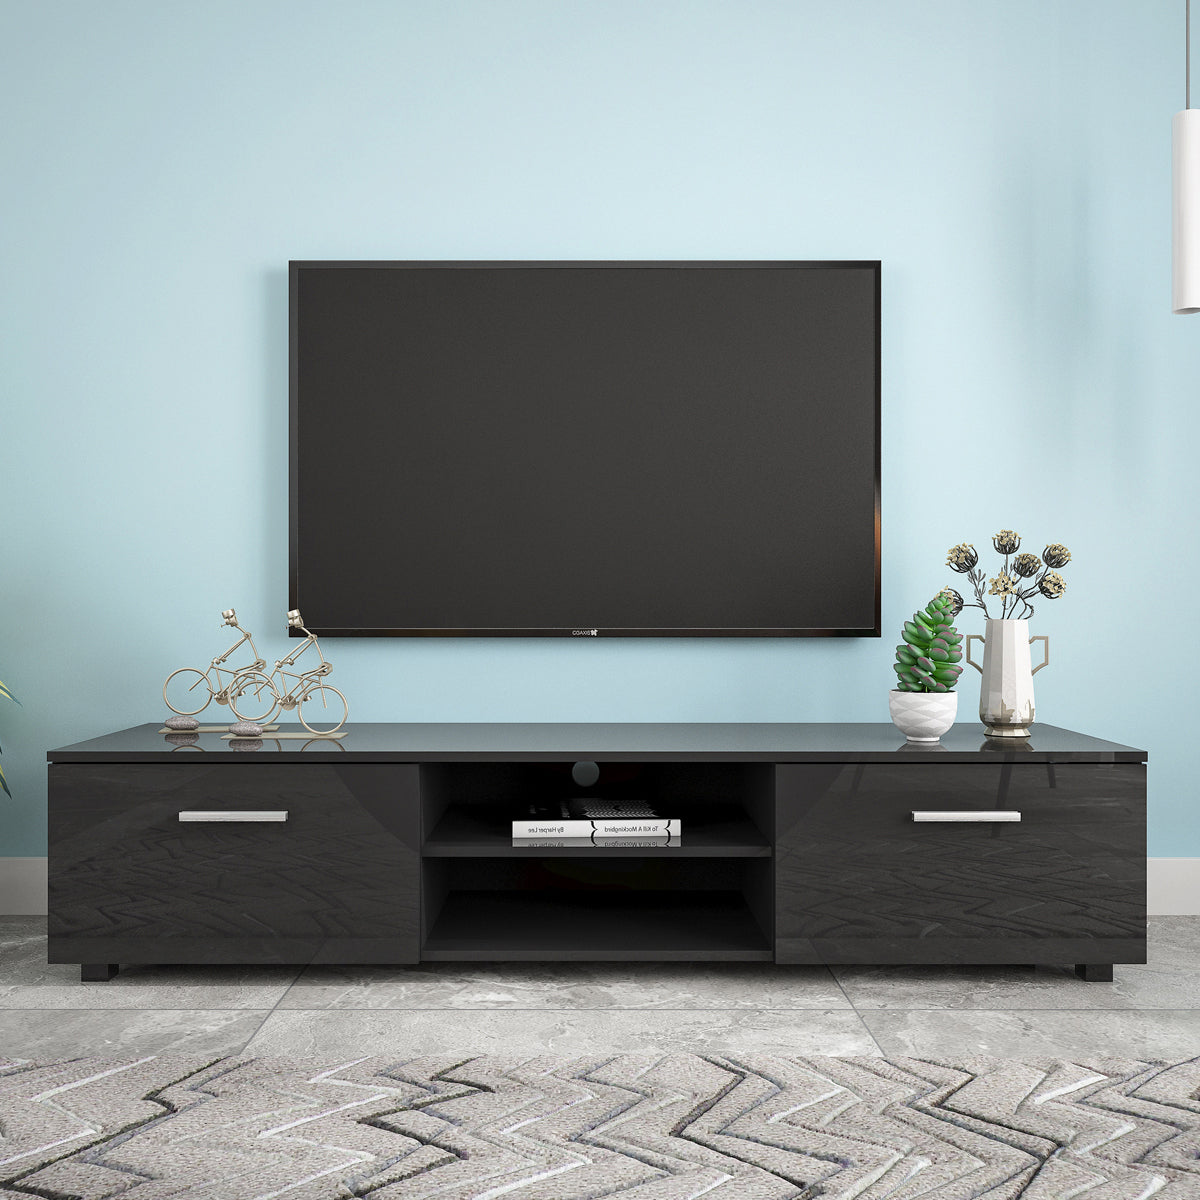 Black TV Stand for 70 Inch TV Stands, Media Console Entertainment Center Television Table, 2 Storage Cabinet with Open Shelves for Living Room Bedroom - Tonkn